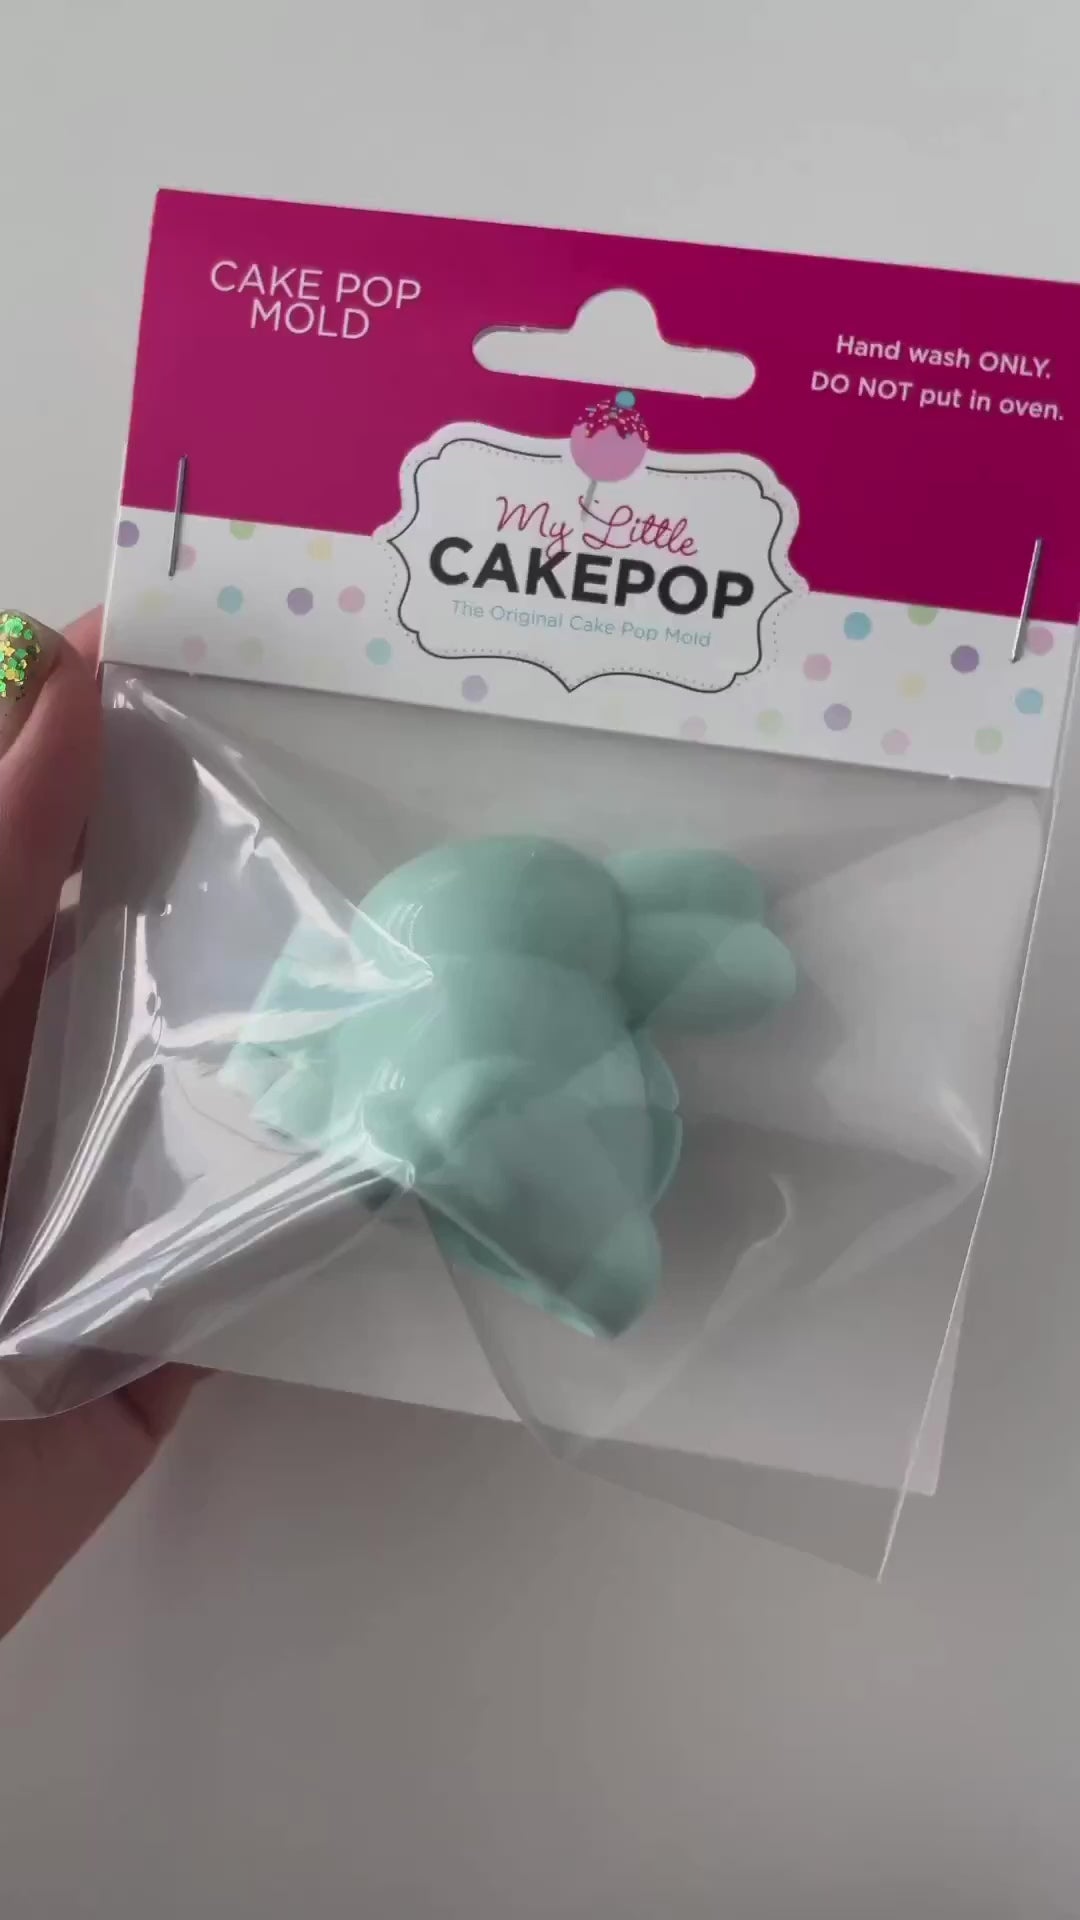 Cake pop mold, mini cake board and & flower mold from @mylittlecakepop